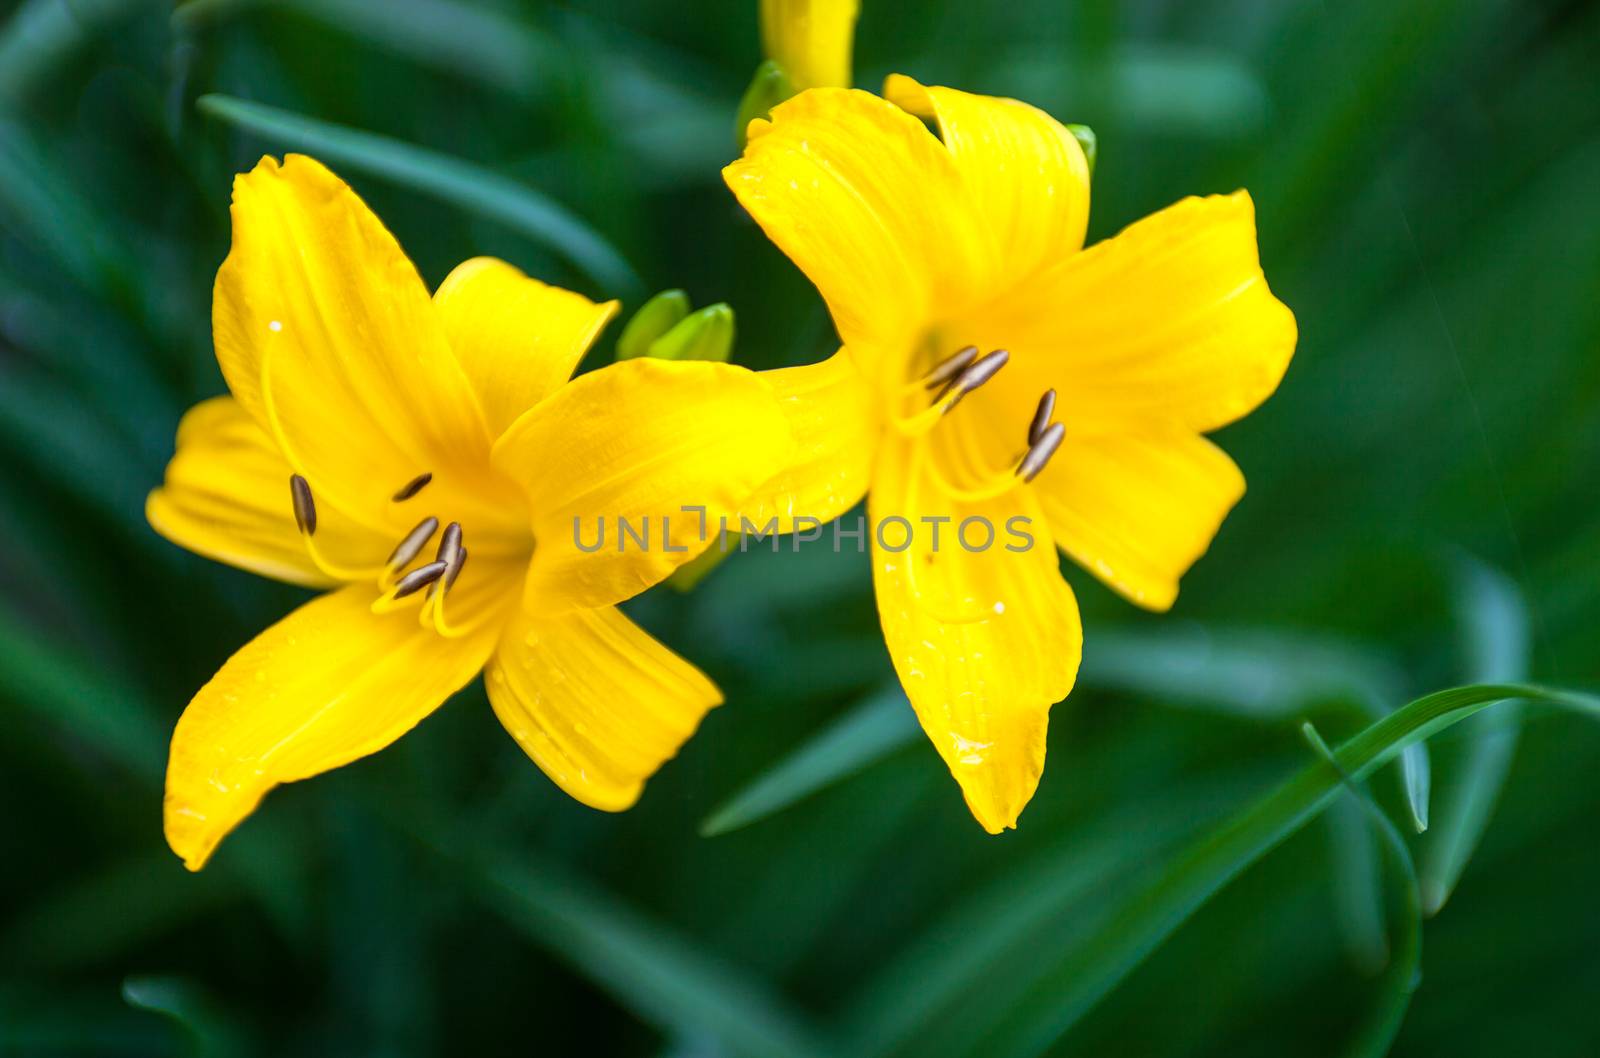 Closeup of the blooming yellow lily flowers by rootstocks